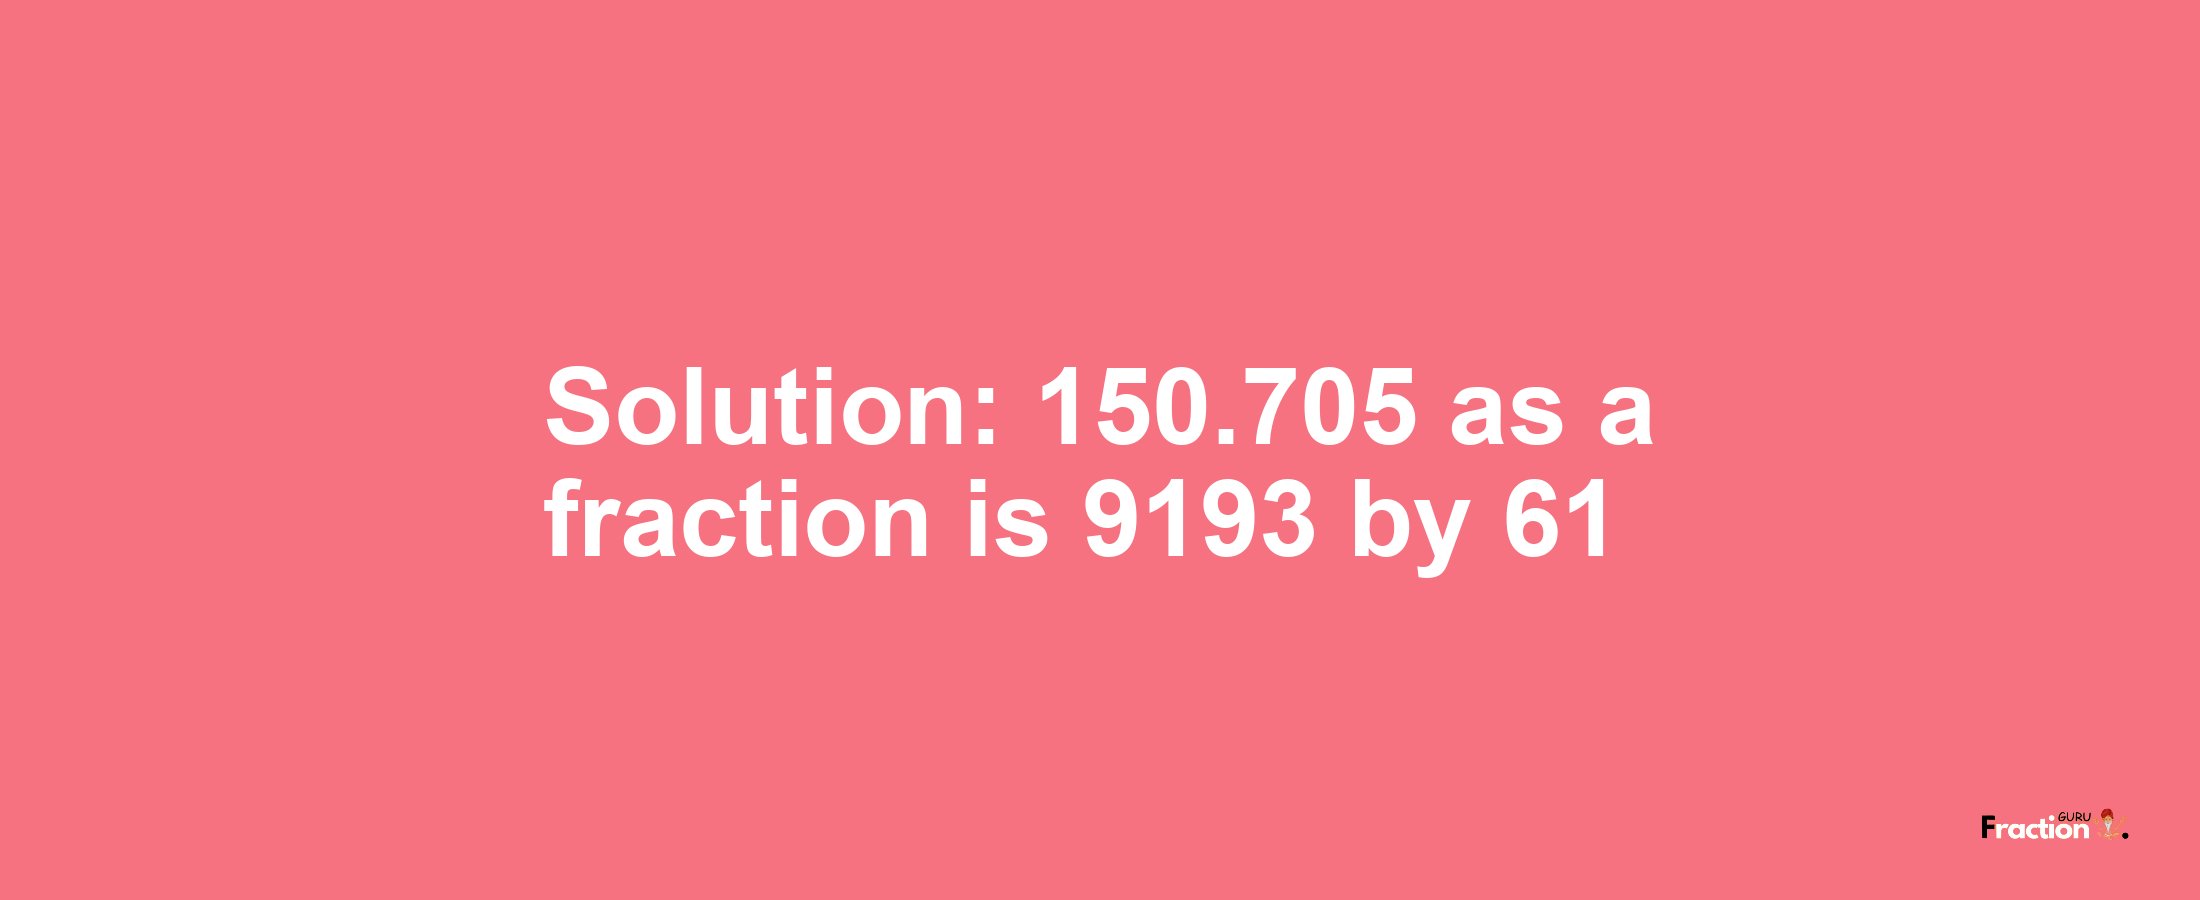 Solution:150.705 as a fraction is 9193/61